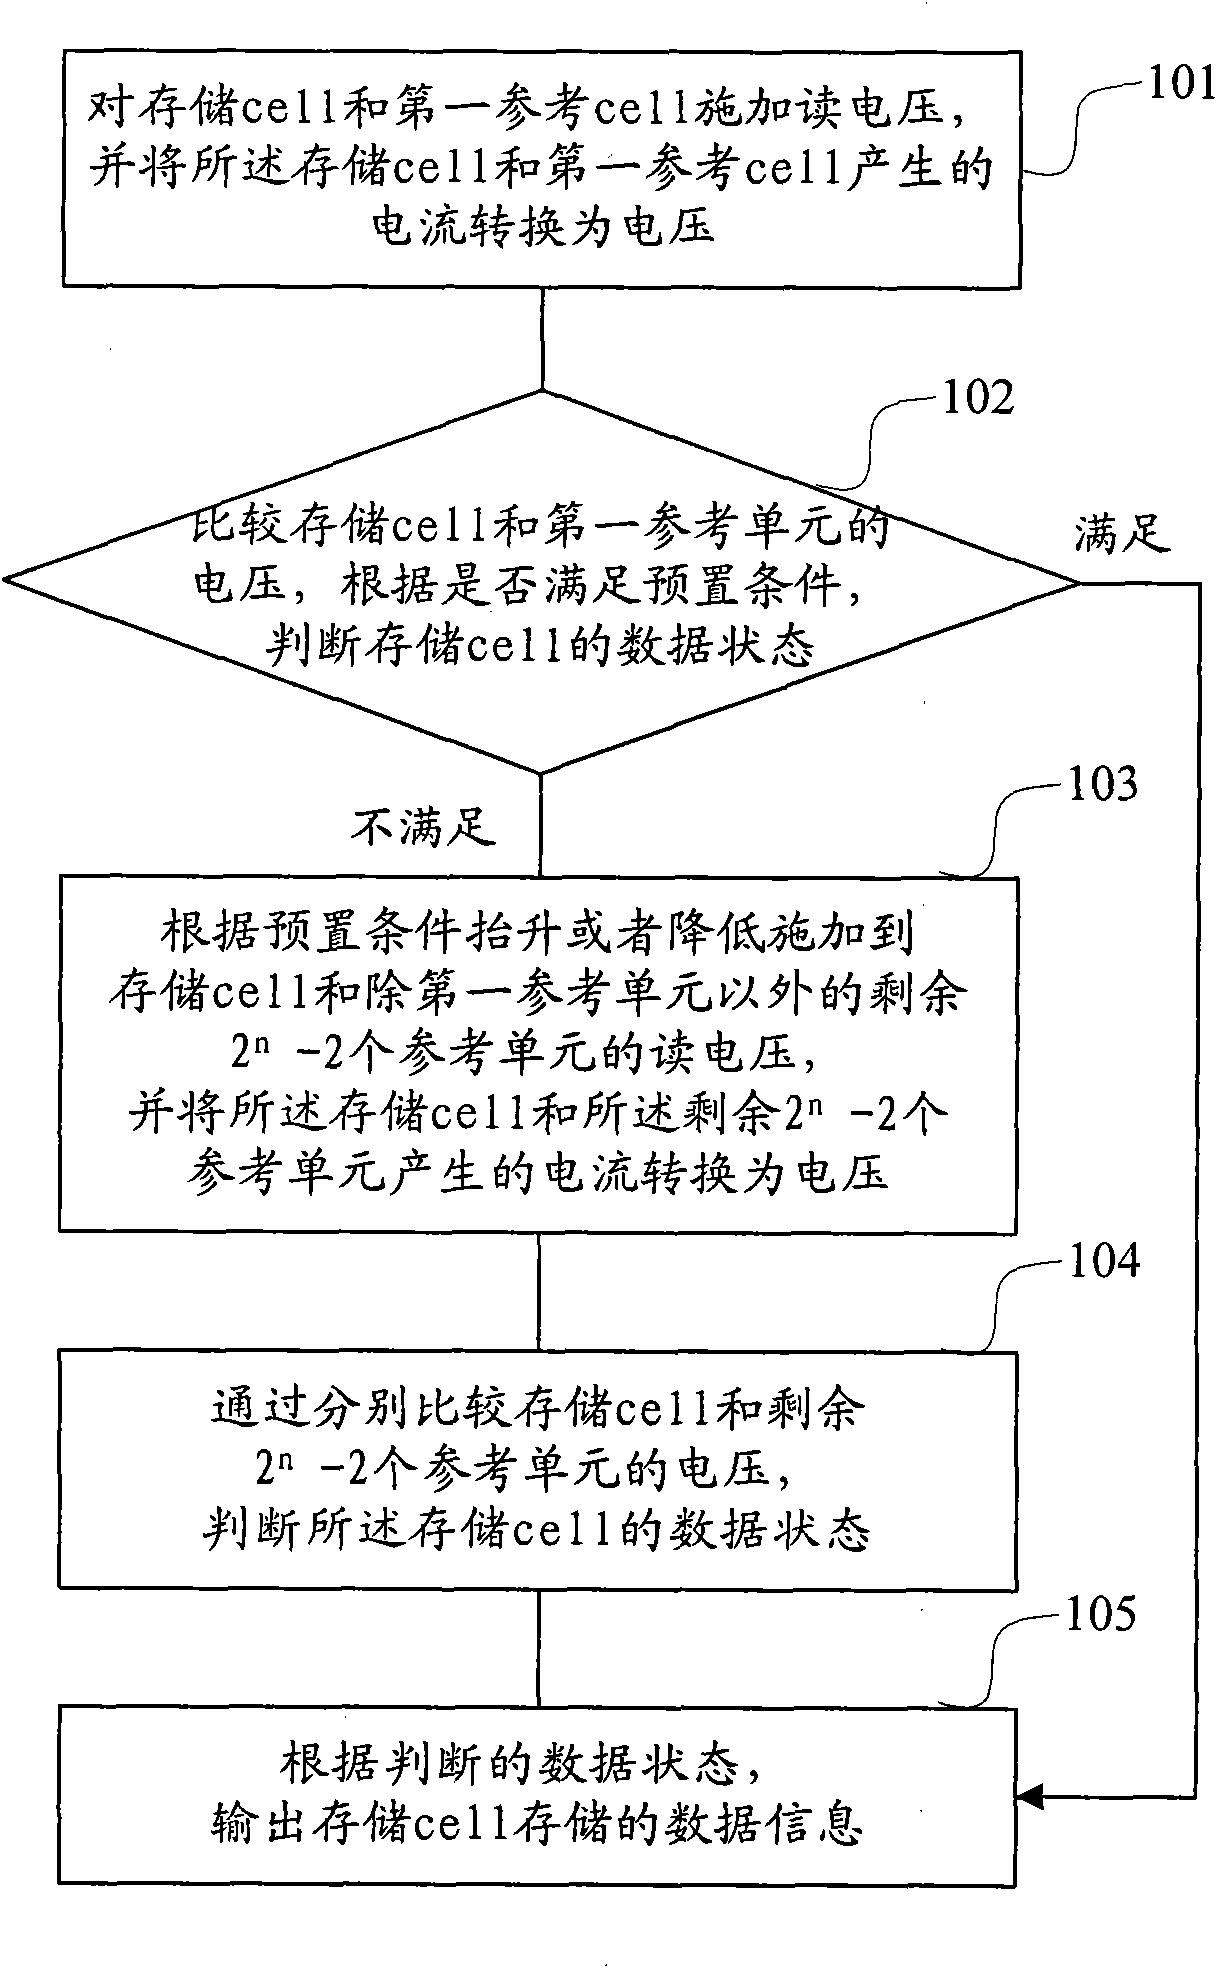 Data reading method for memory cell and sensitive amplifier used for multi-level cell (MLC)